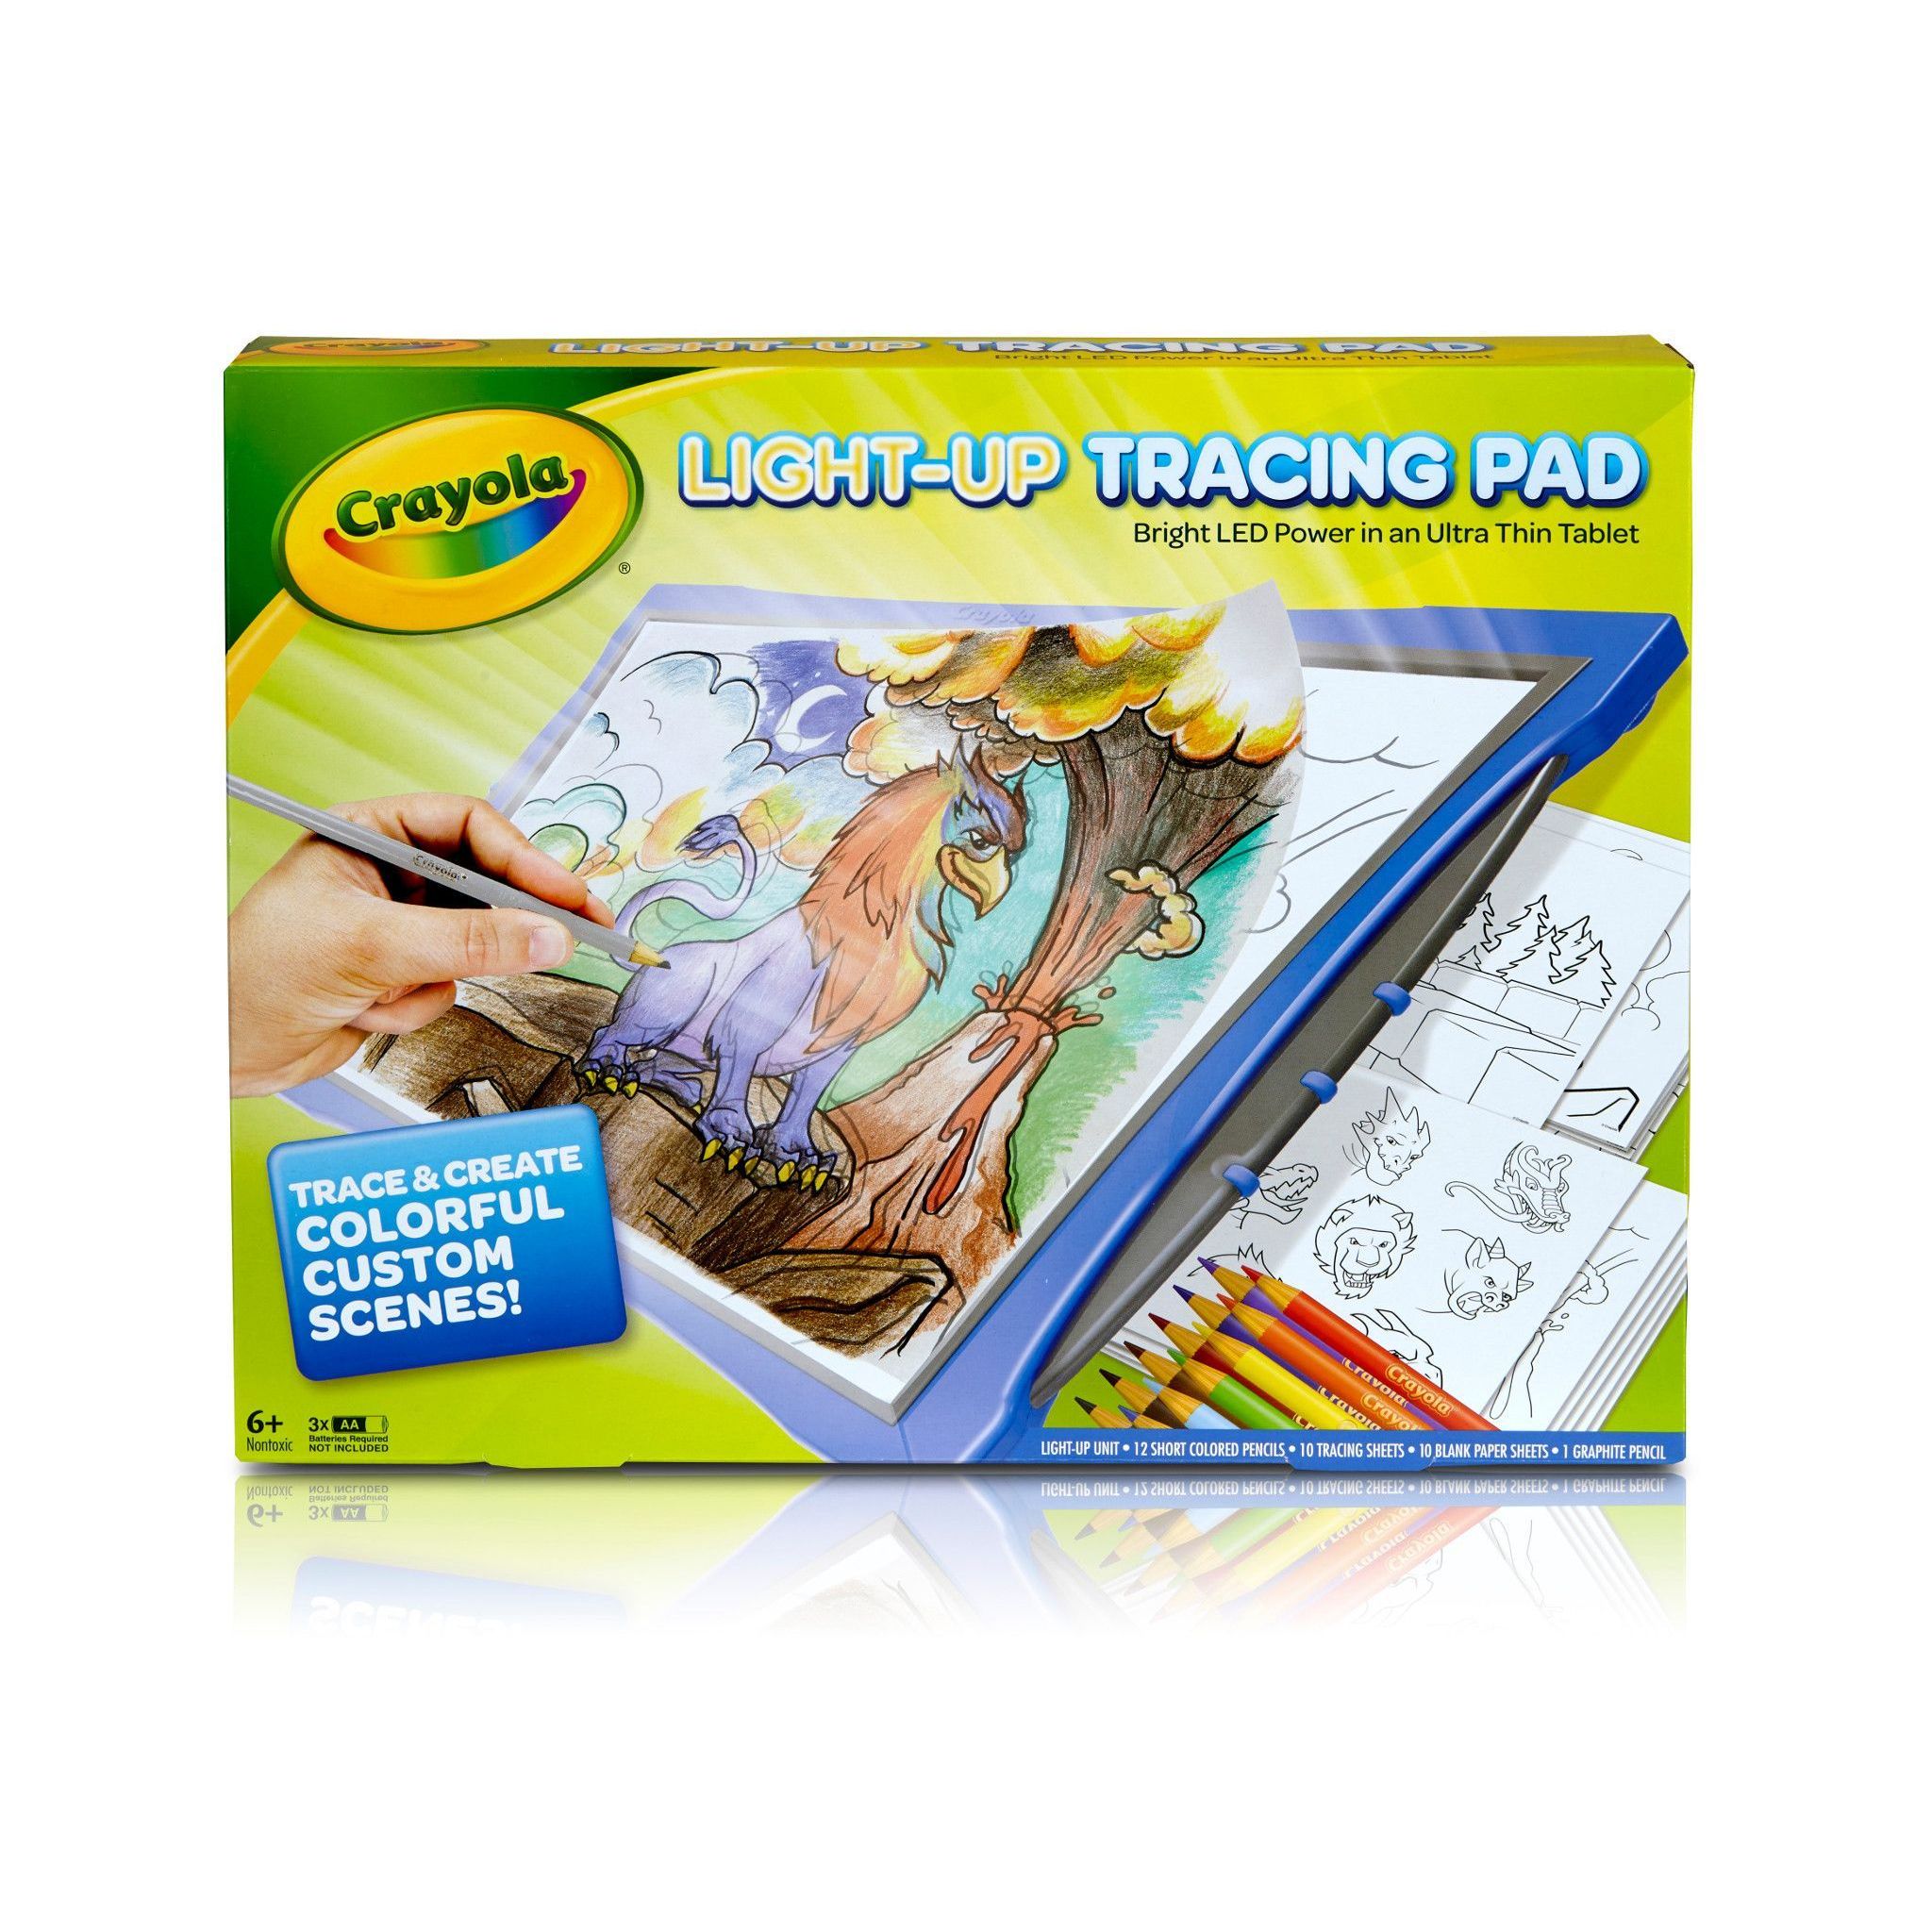 Crayola Light-Up Tracing Pad, Blue, School Supplies, Art Set, Gifts for Girls & Boys, Beginner Child - image 1 of 9